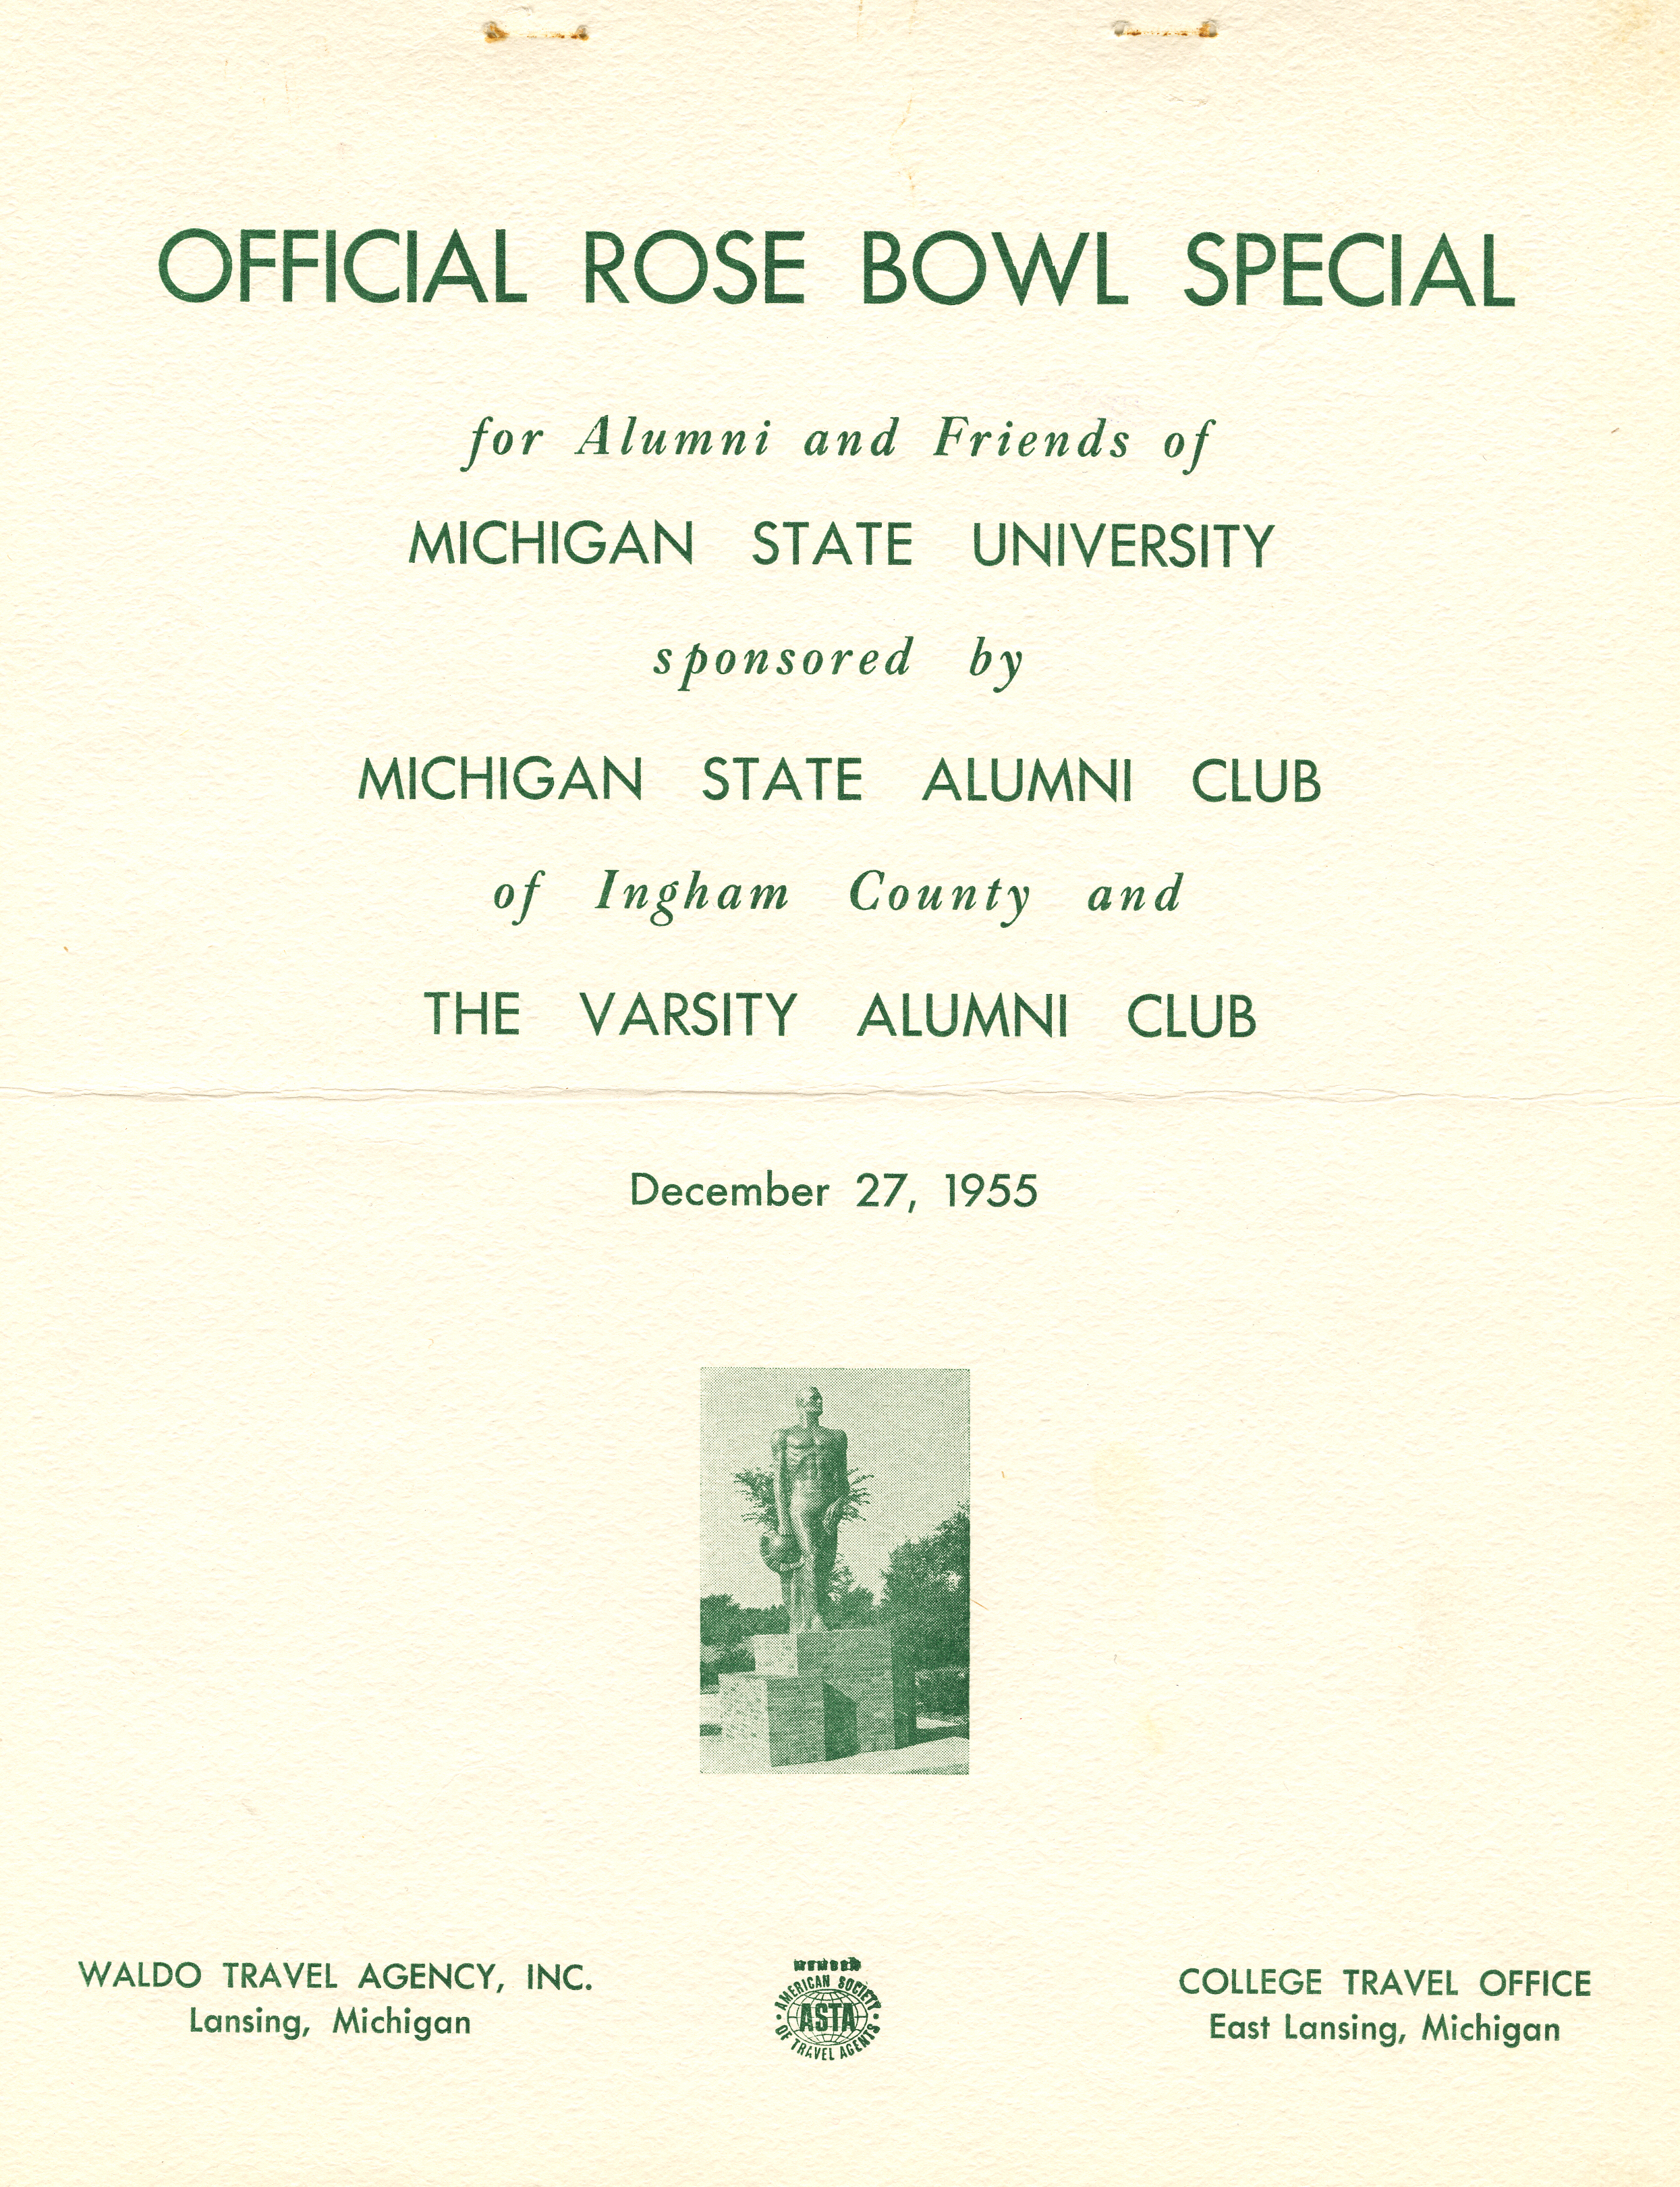 Official Rose Bowl Special travel info, 1955